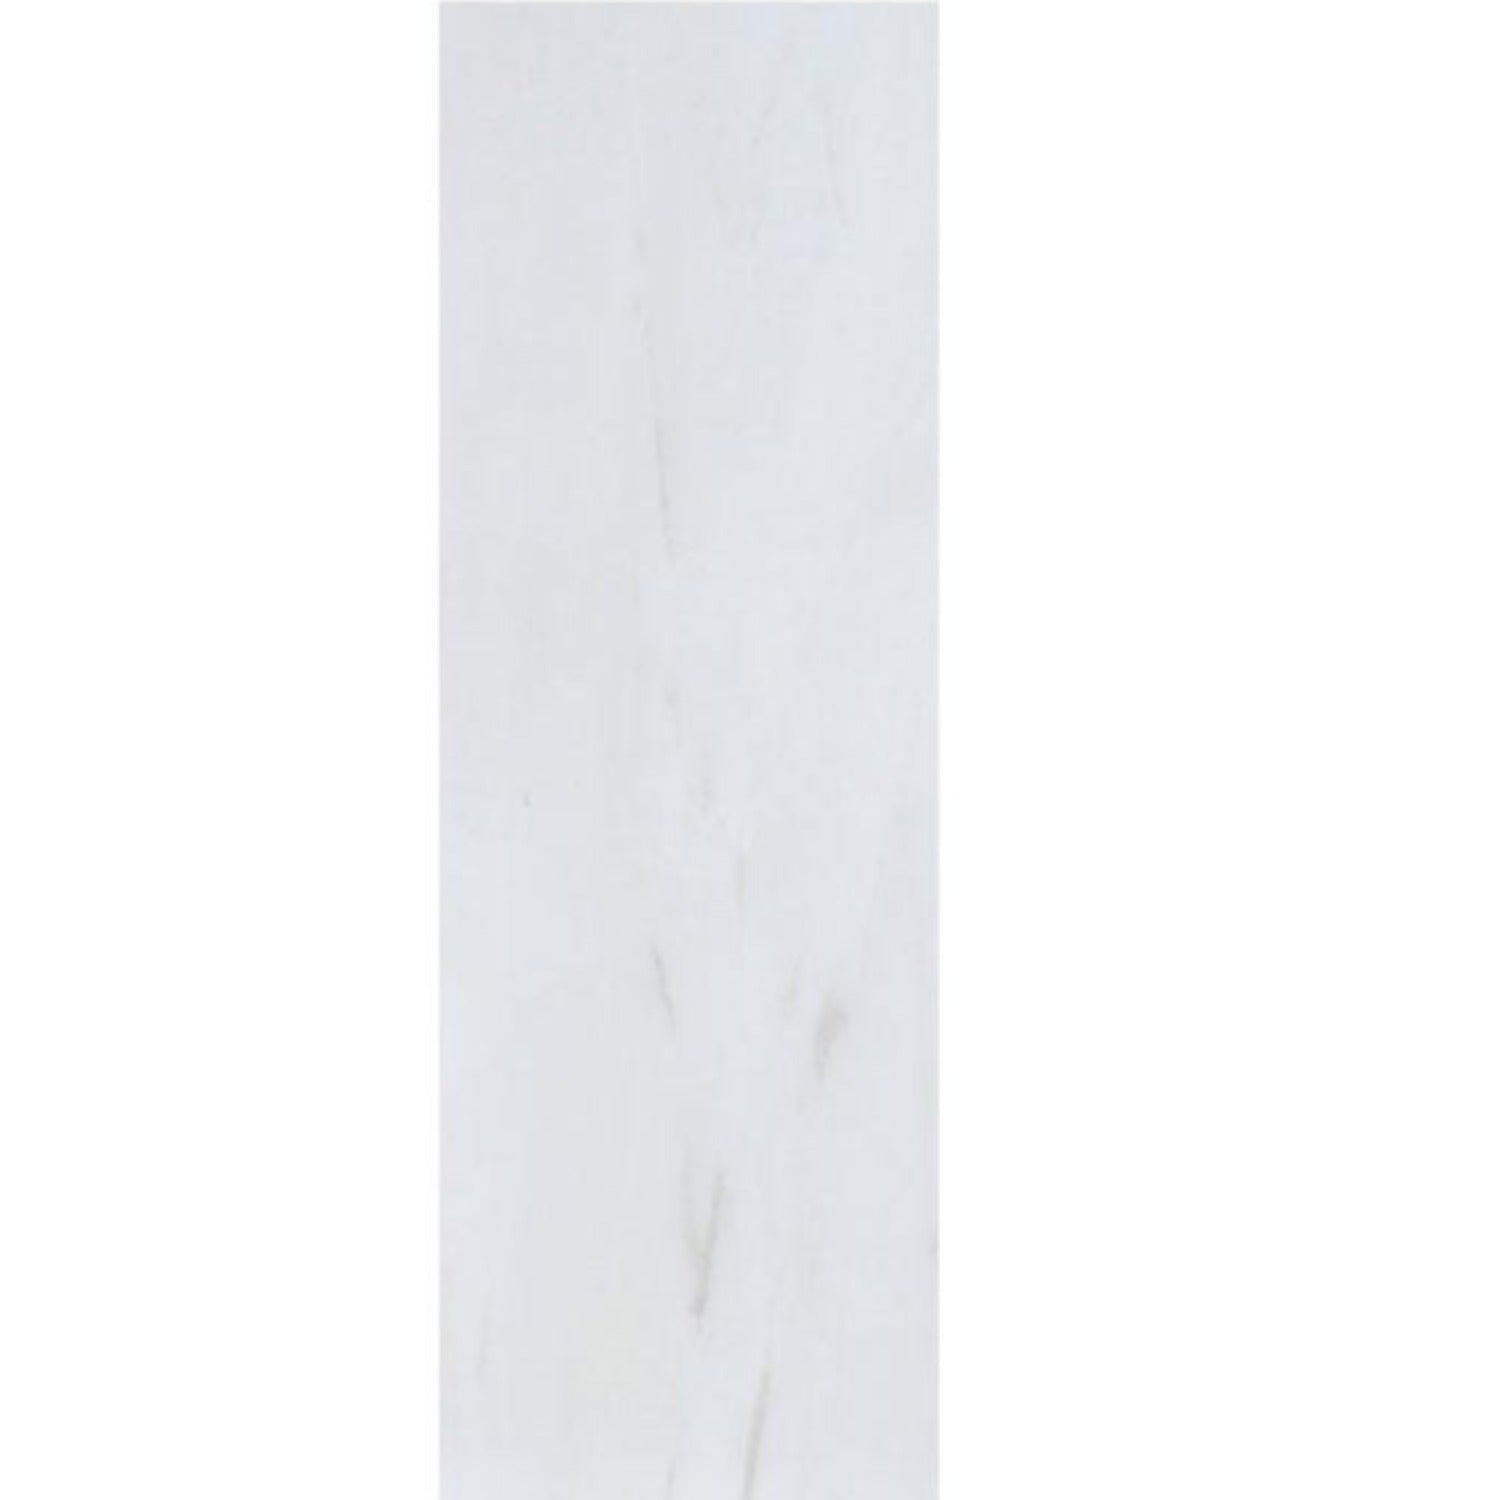 Dolomite 3x12 Polished Marble Tile $18.00/SF All Marble Tiles